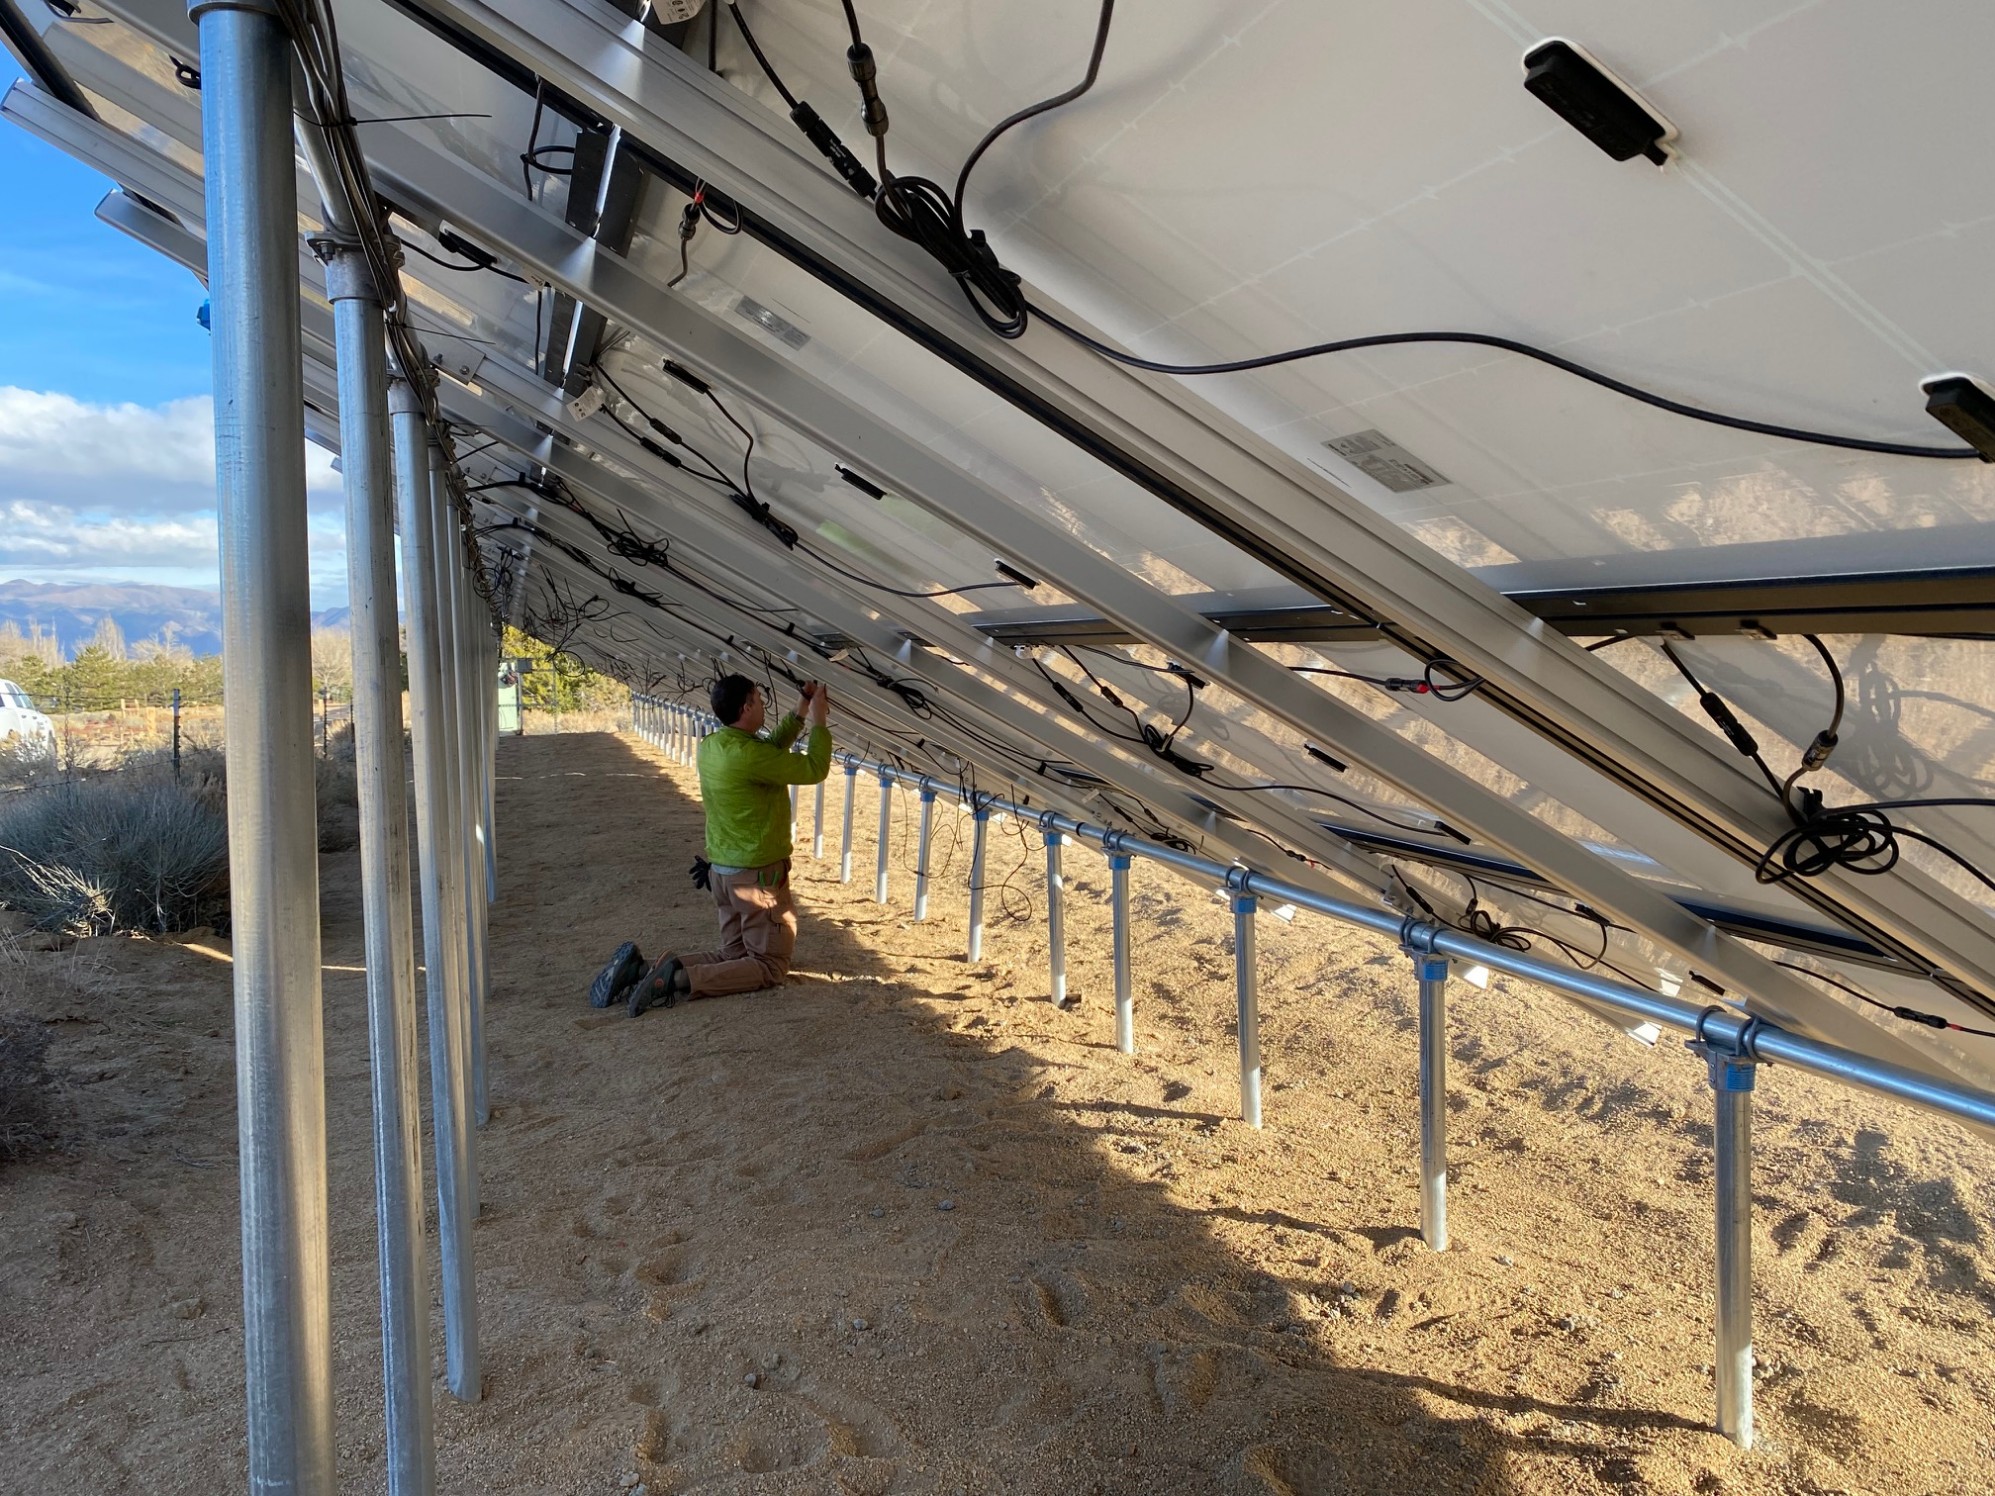 A man connecting wires behind a solar array